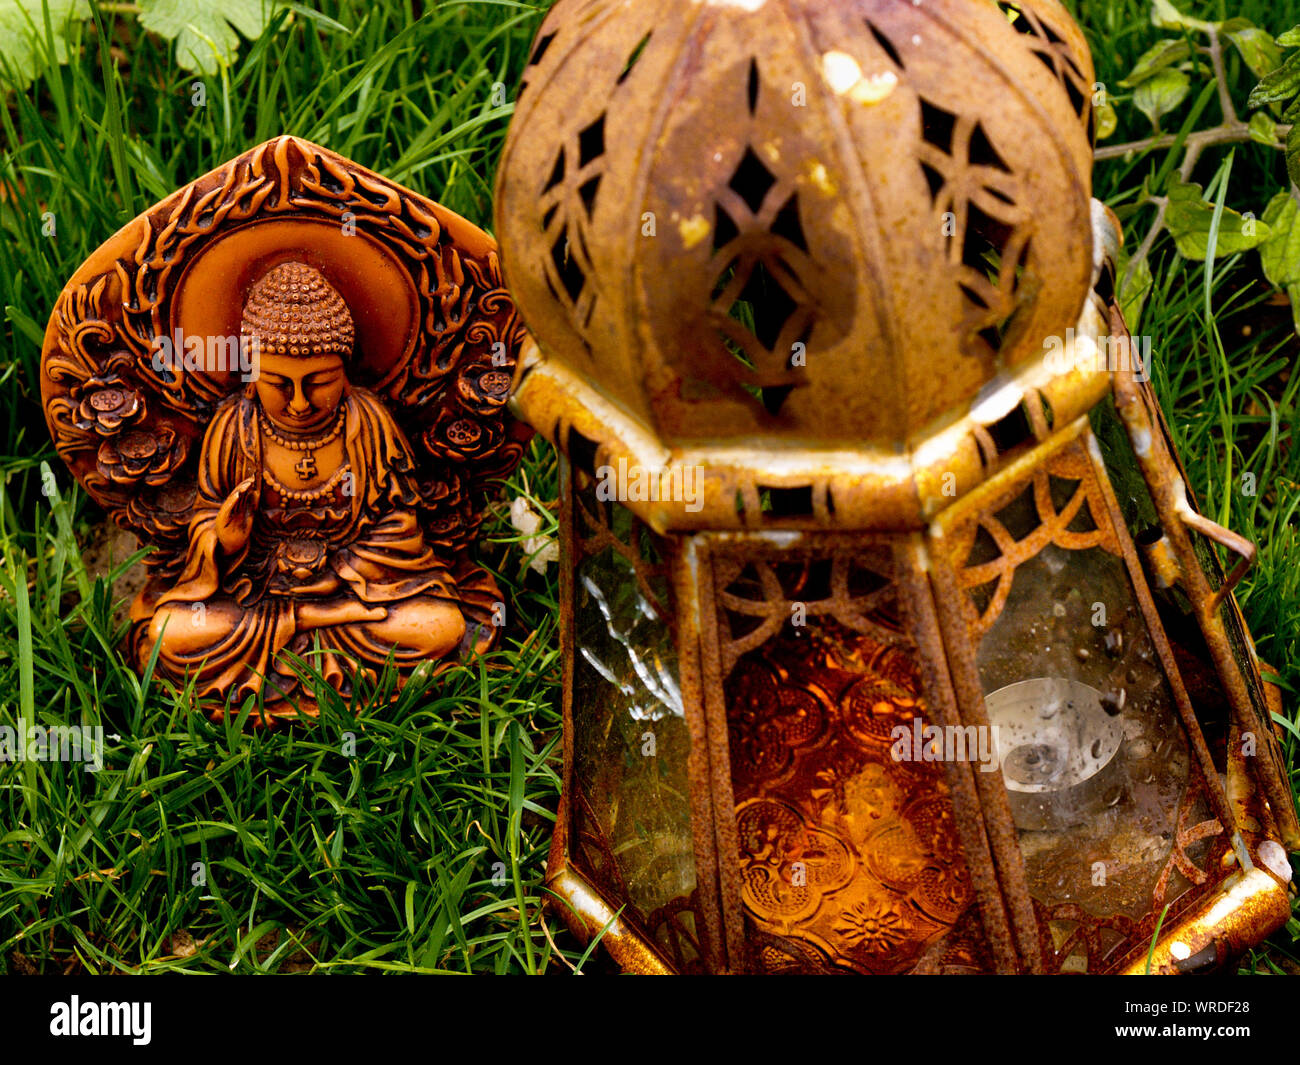 High Angle View Of Religious Sculpture On Grassy Field Stock Photo